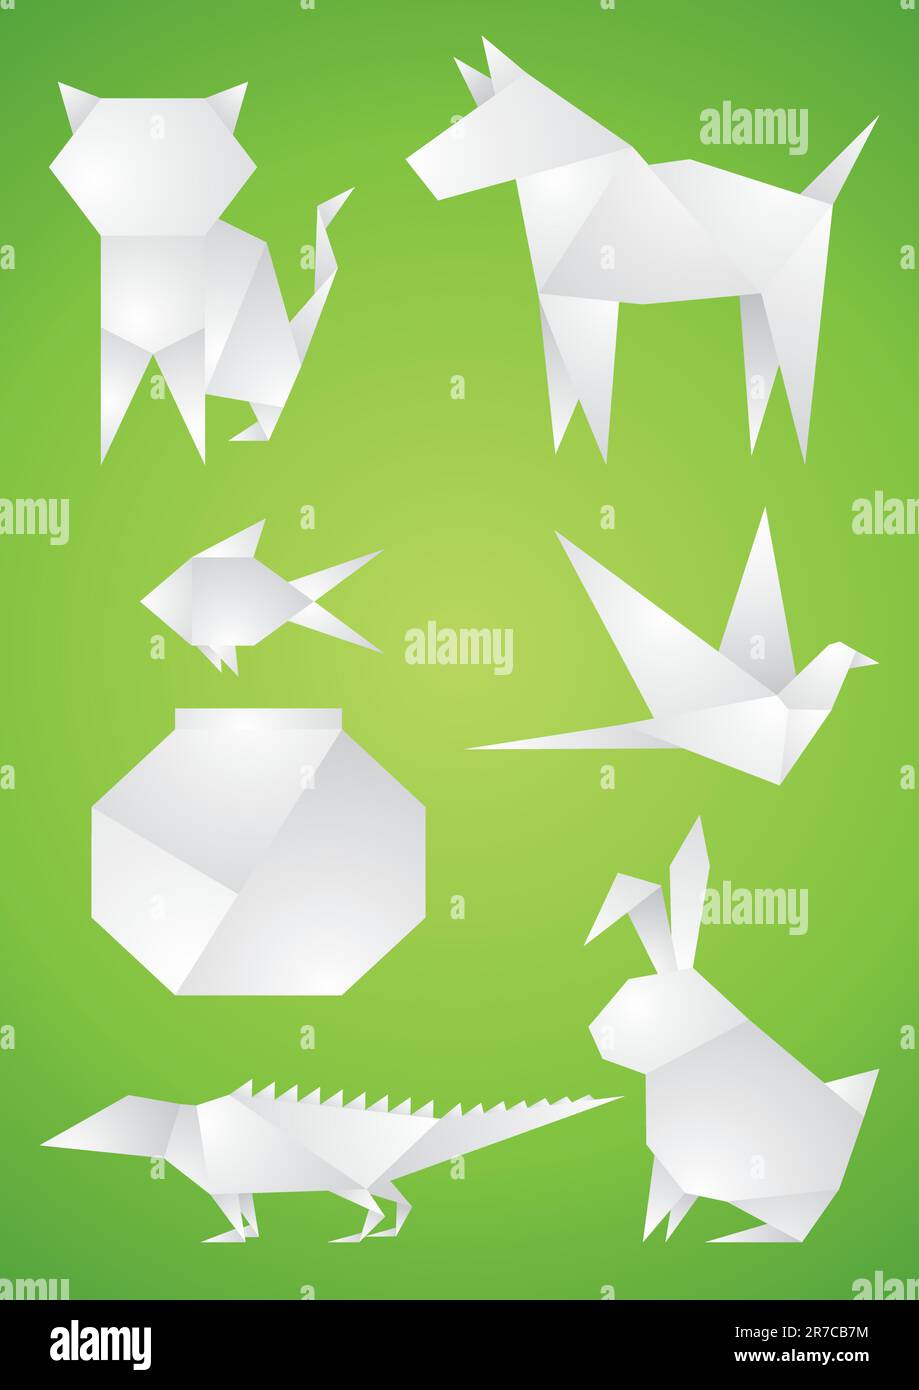 Origami Pets of the white paper on green background Stock Vector